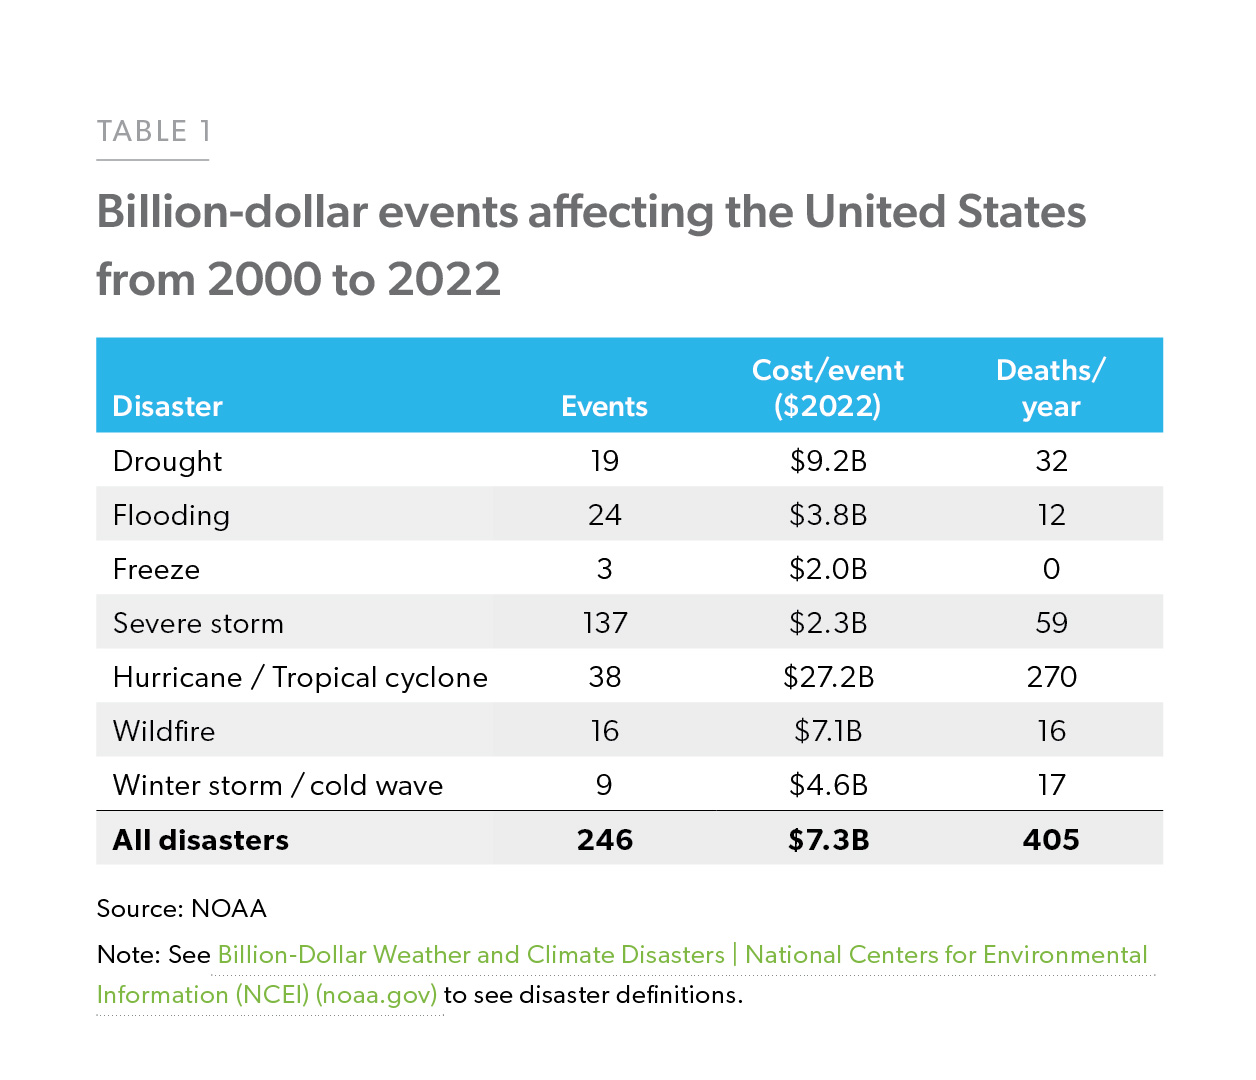 Table 1: Billion-dollar events affecting the United States from 2000 to 2002